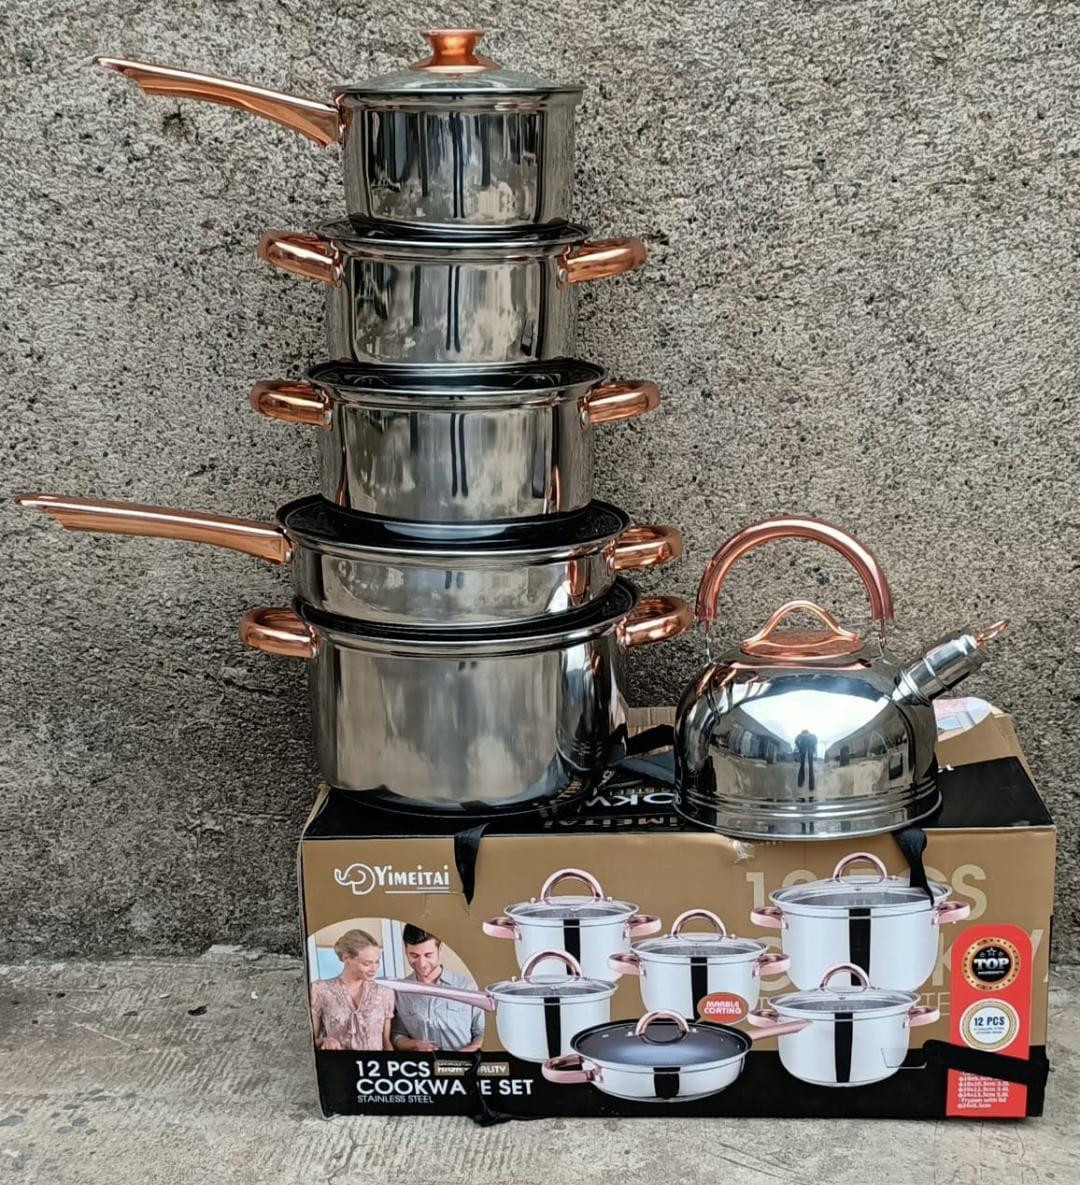 12 pcs cookware with Kettle - Yimentai